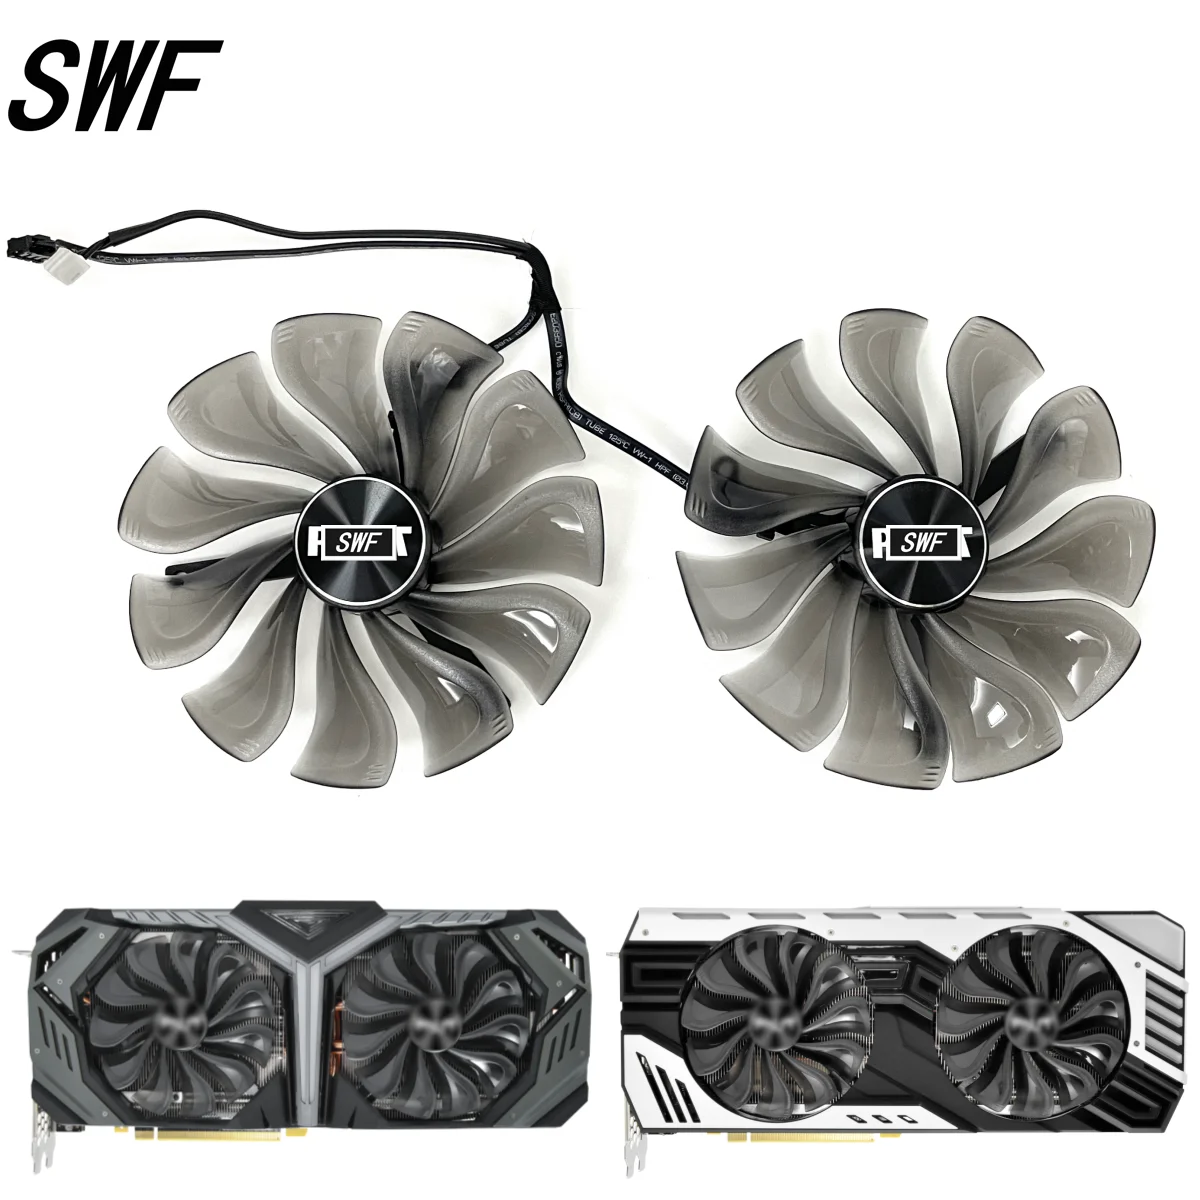 

95mm GAA8S2U FD10015H12S Palit RTX2080 Video Card Cooling Fan For Palit RTX 2060 2070 2080 Super JetStream Graphics Card Cooler